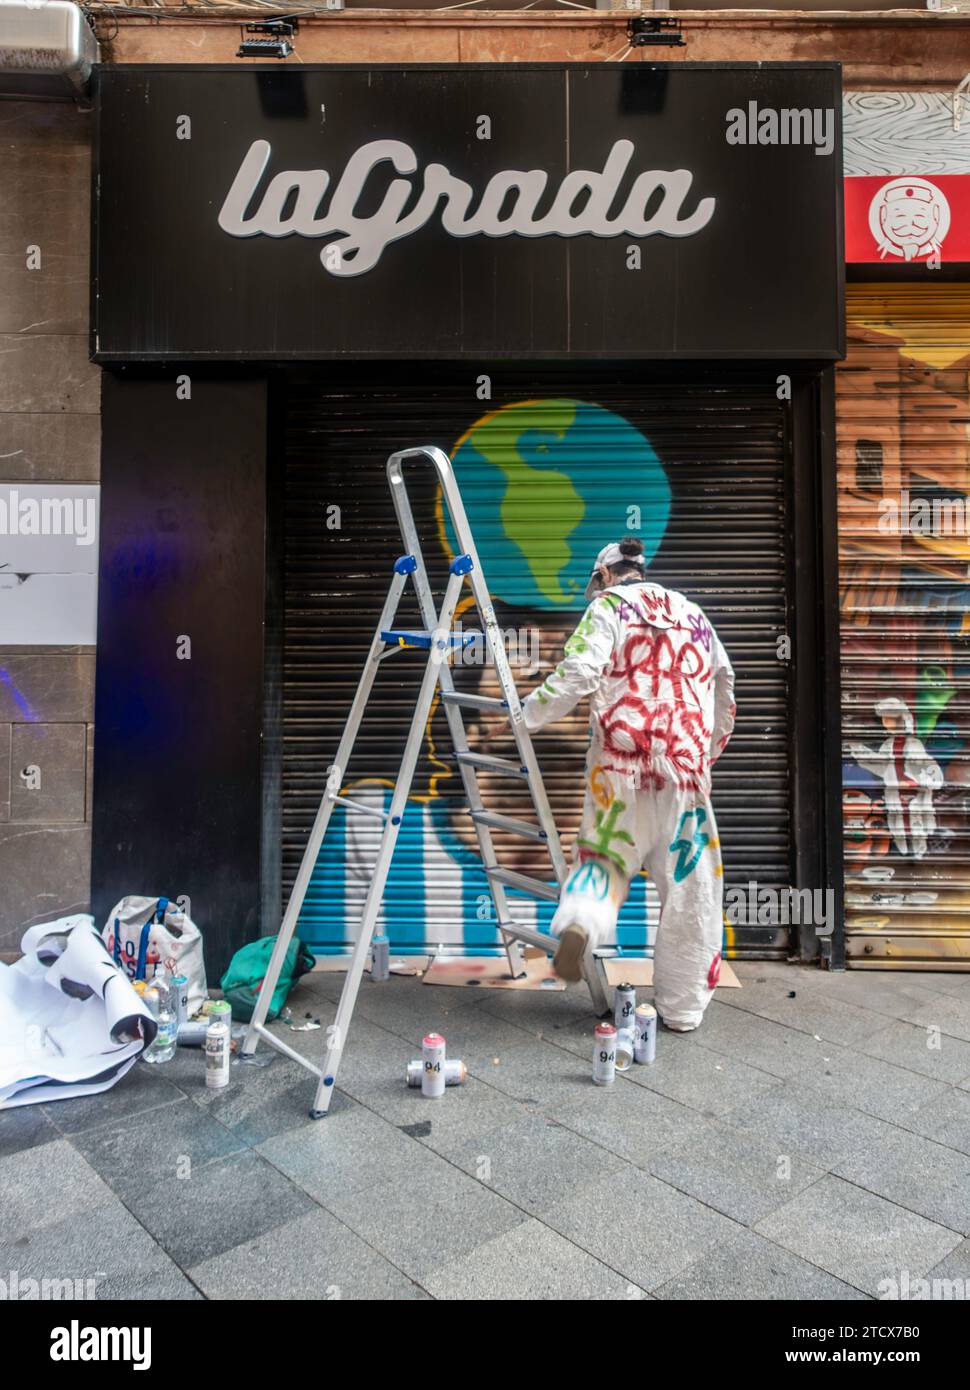 A street artist in a painted coverall creating a colourful mural on a city shutter in Seville, Spain. Stock Photo